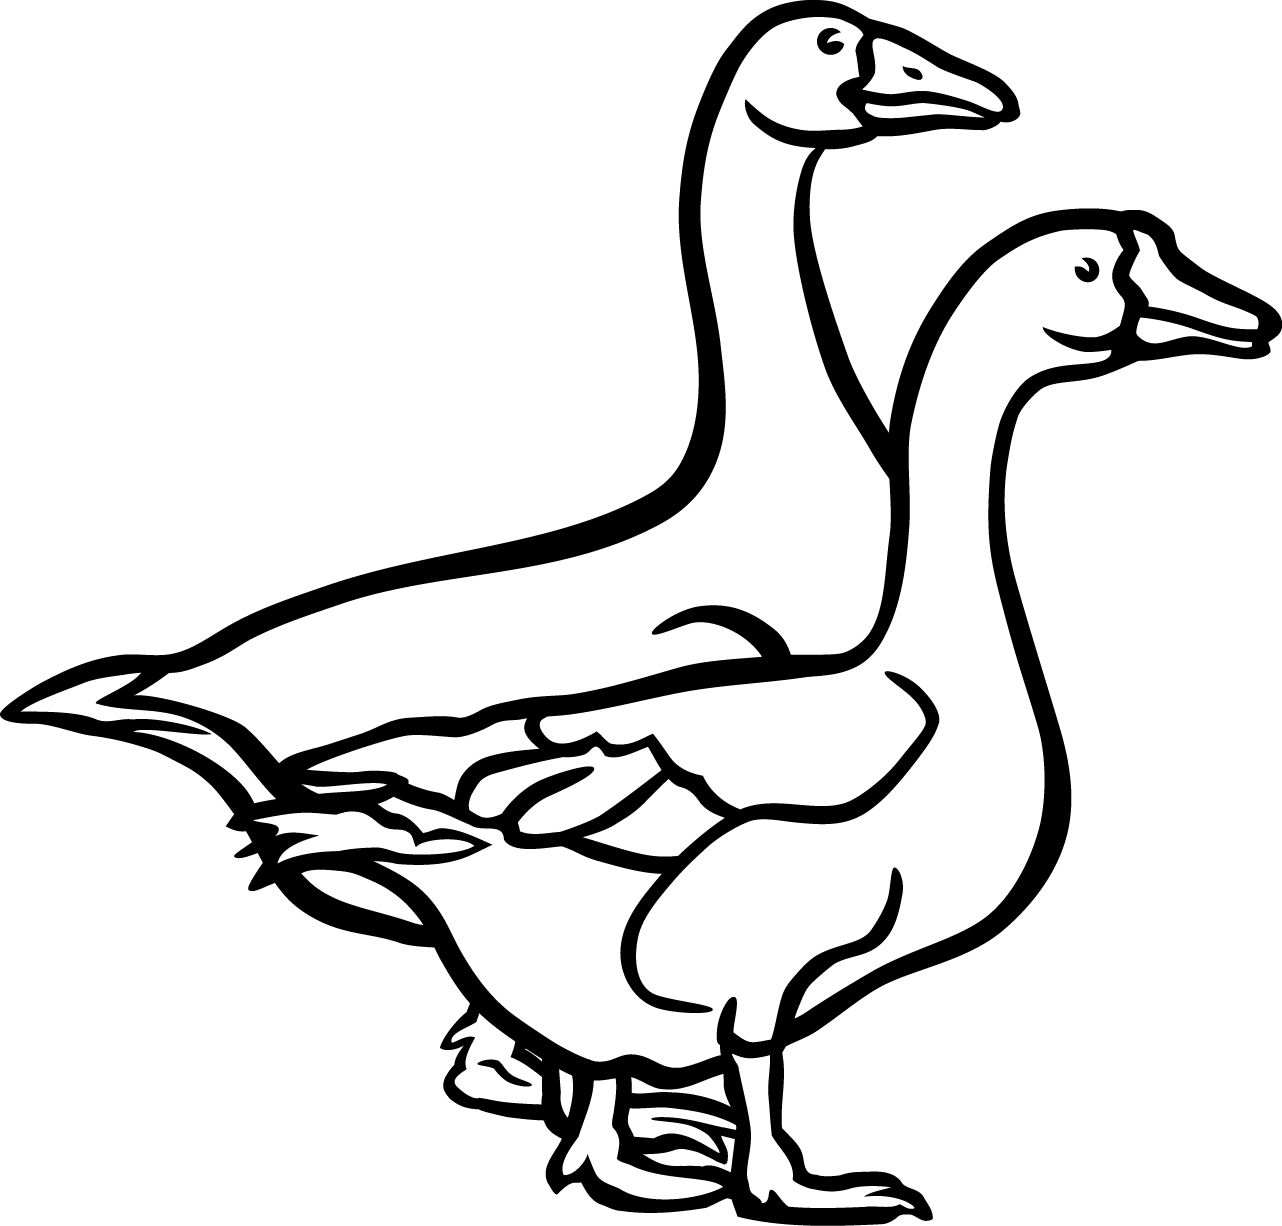 Download Free png Goose Duck Bird Black and white Clip art